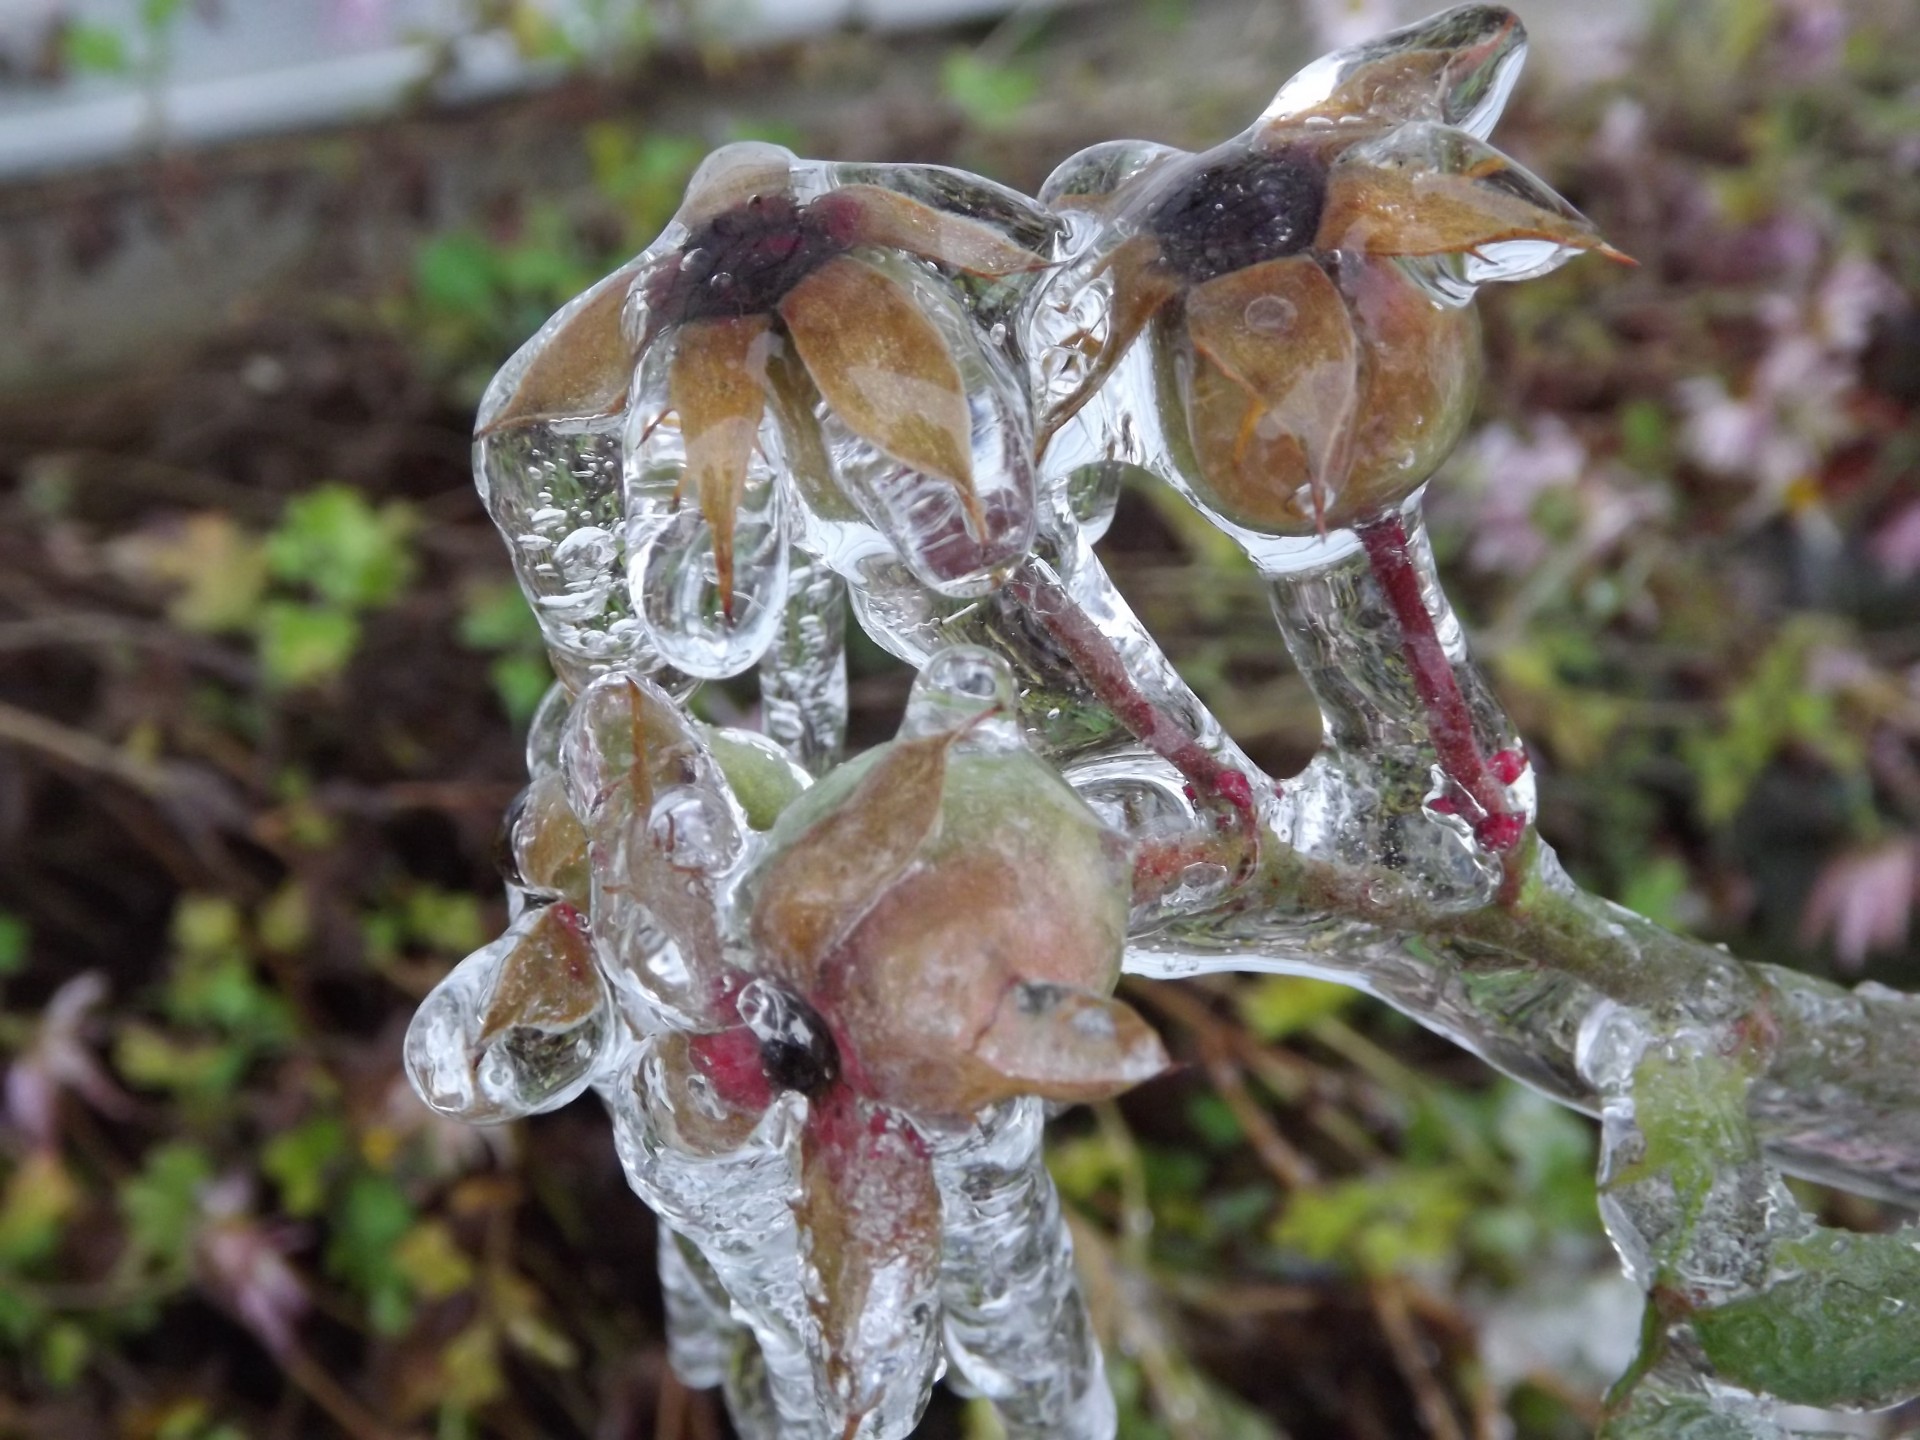 Ice covers flower